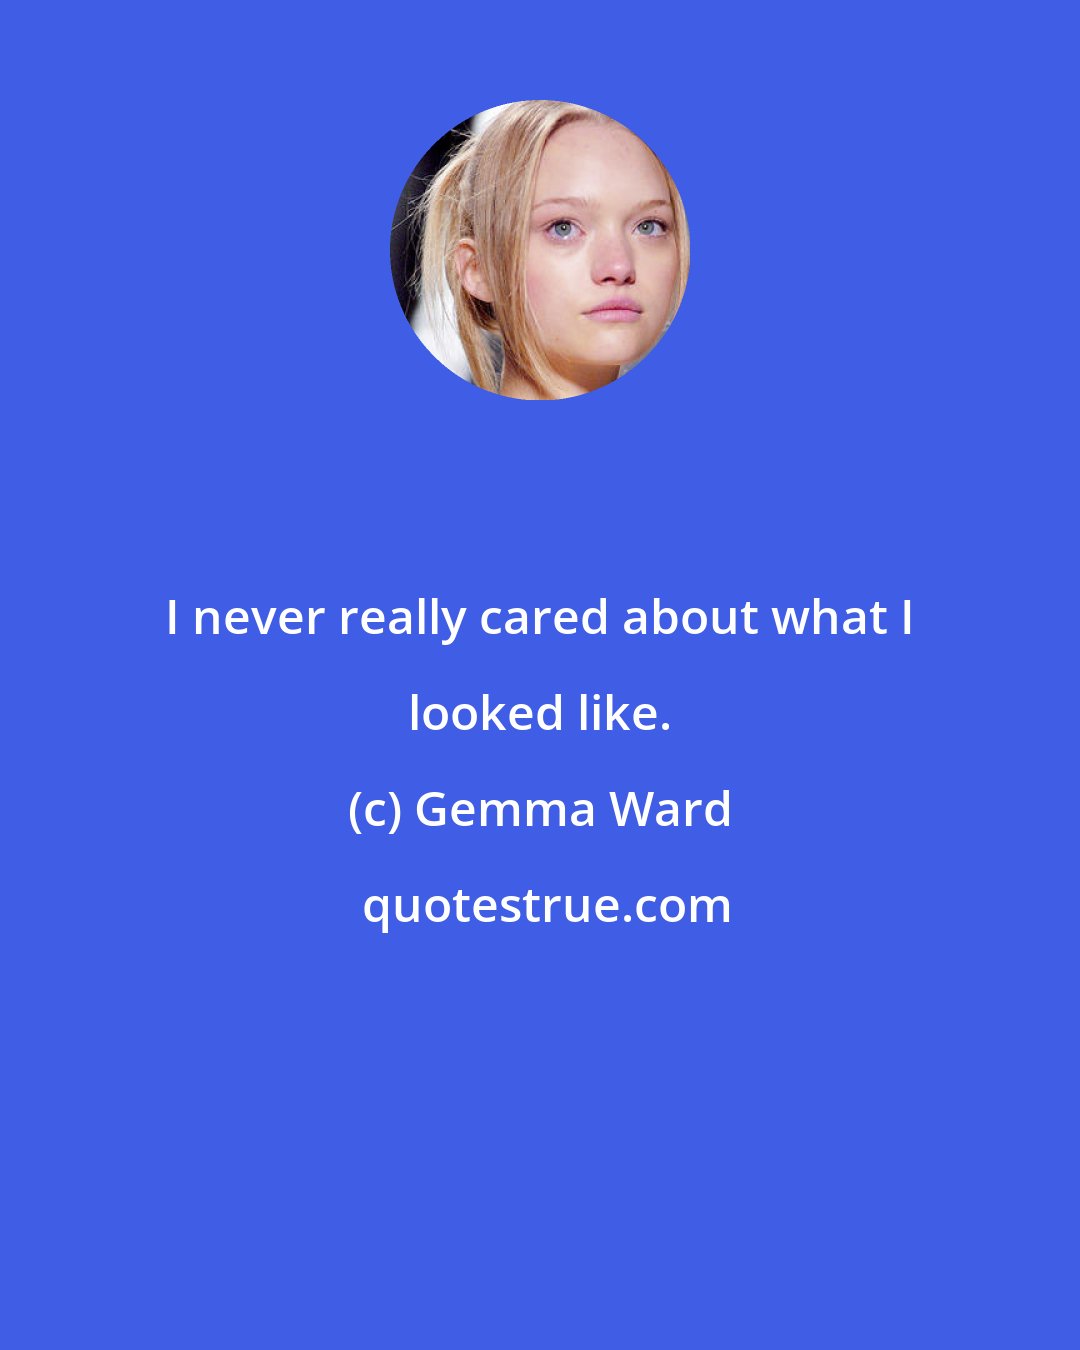 Gemma Ward: I never really cared about what I looked like.